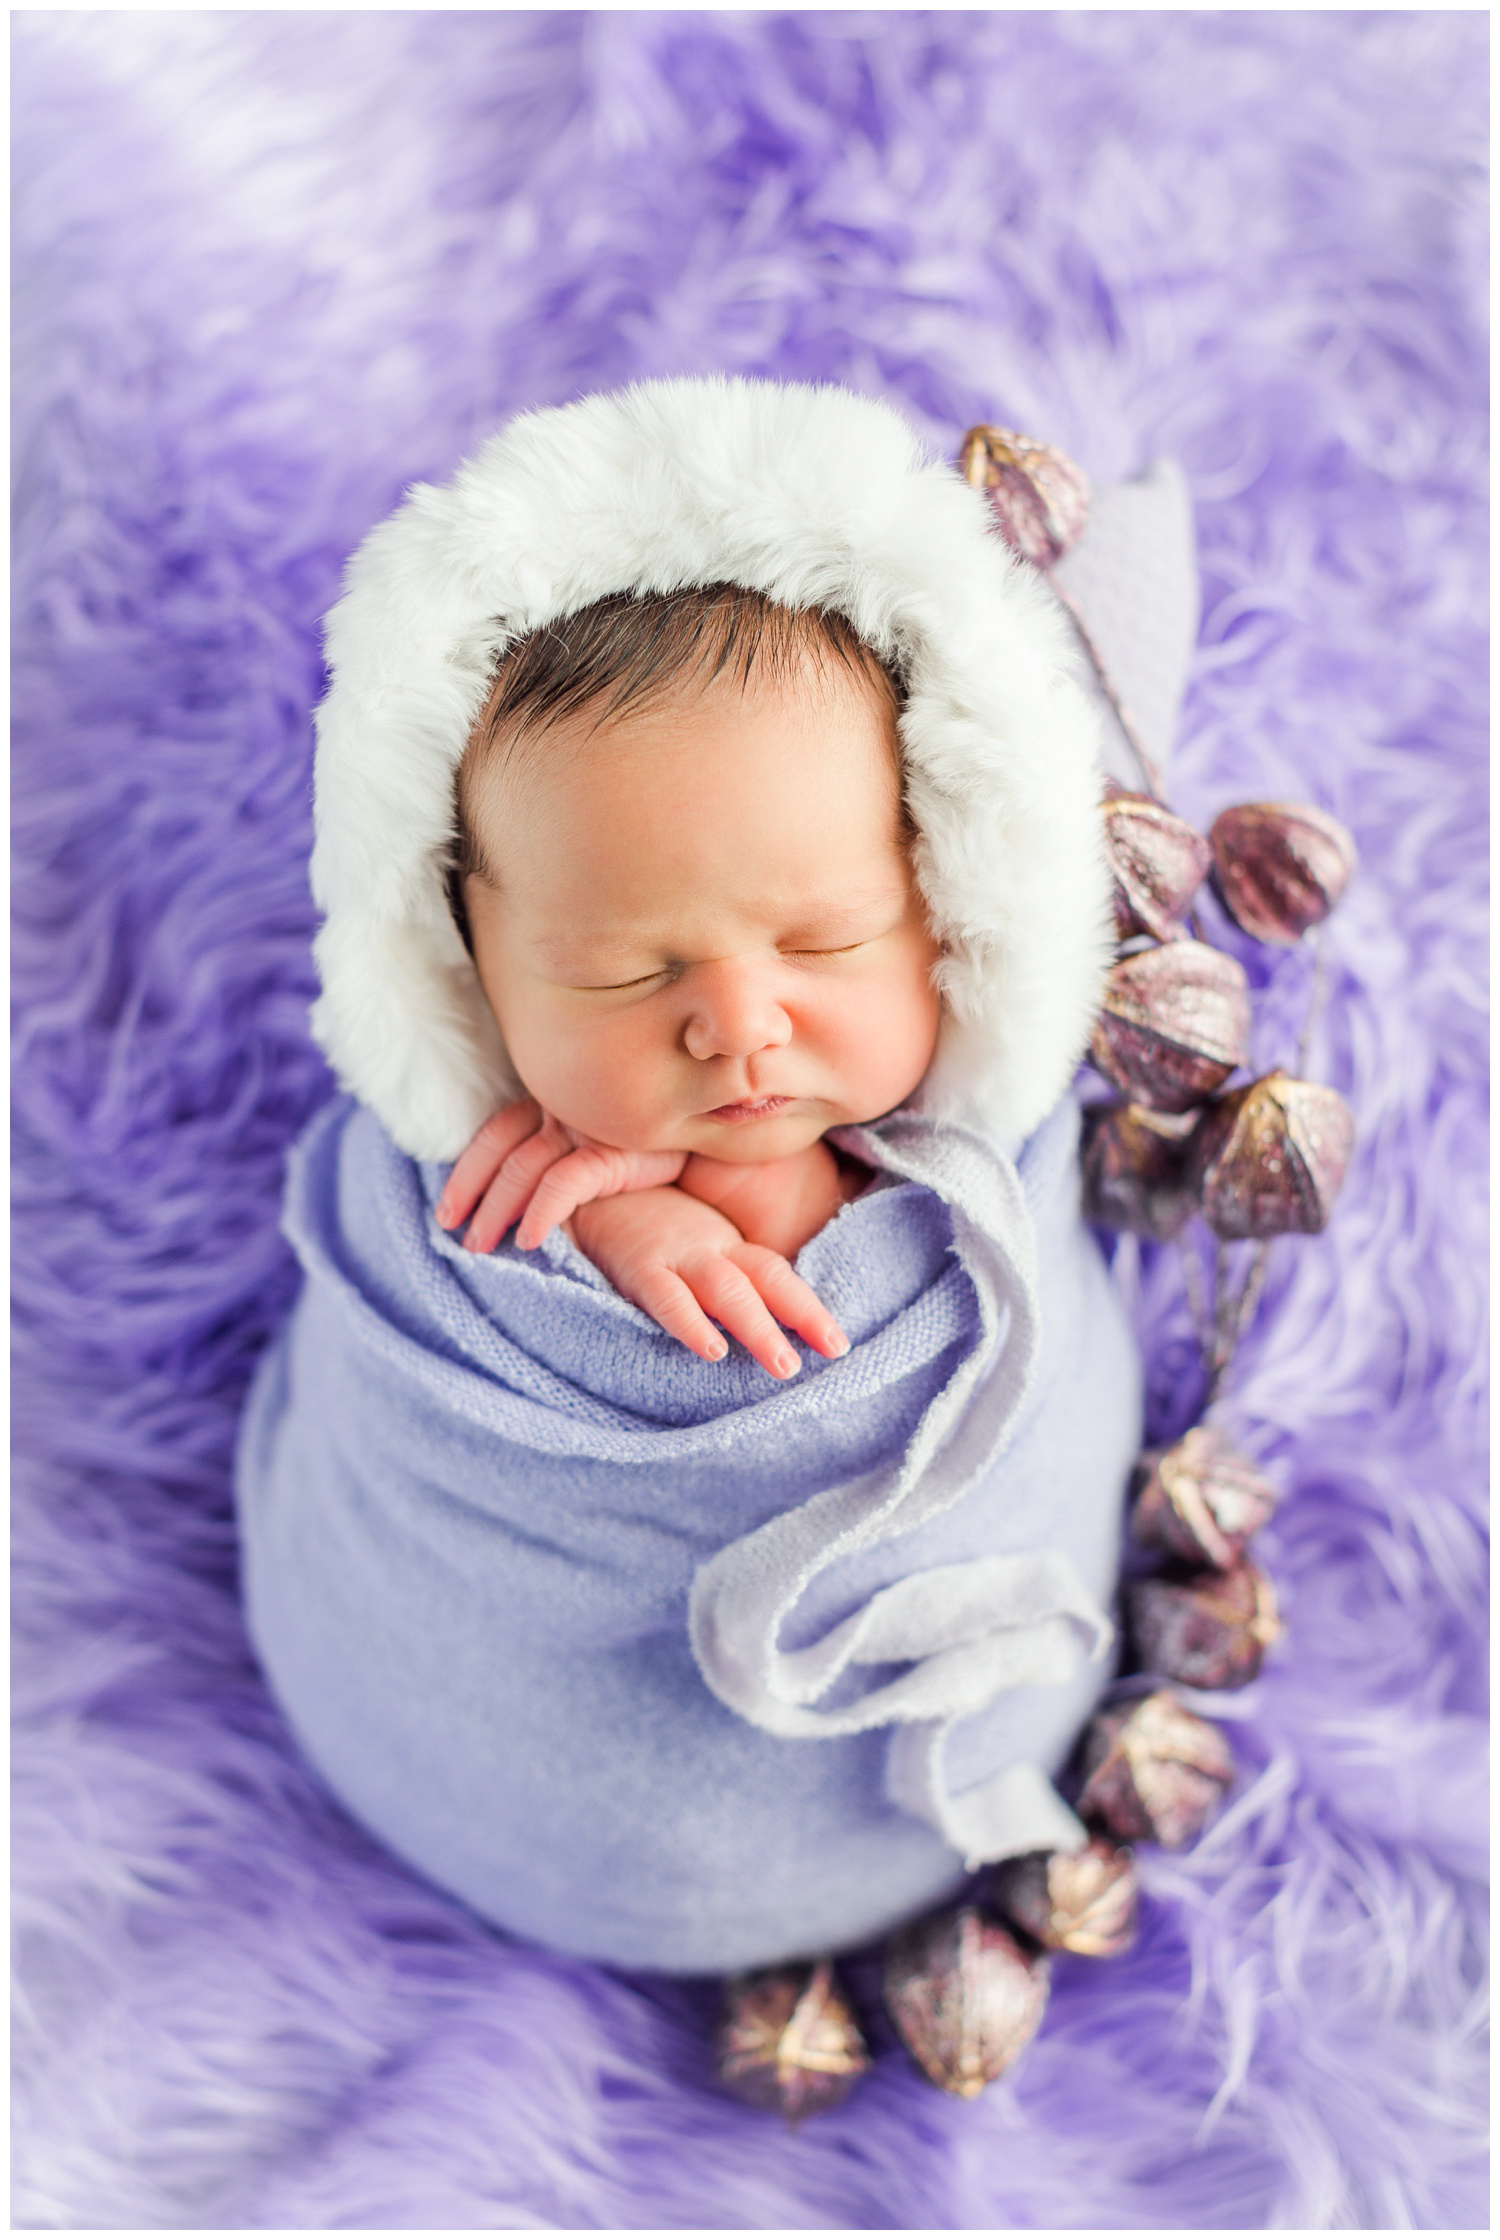 Baby Letti wrapped in lavender wearing a fluffy eskimo bonnet surrounded my purple floral | CB Studio